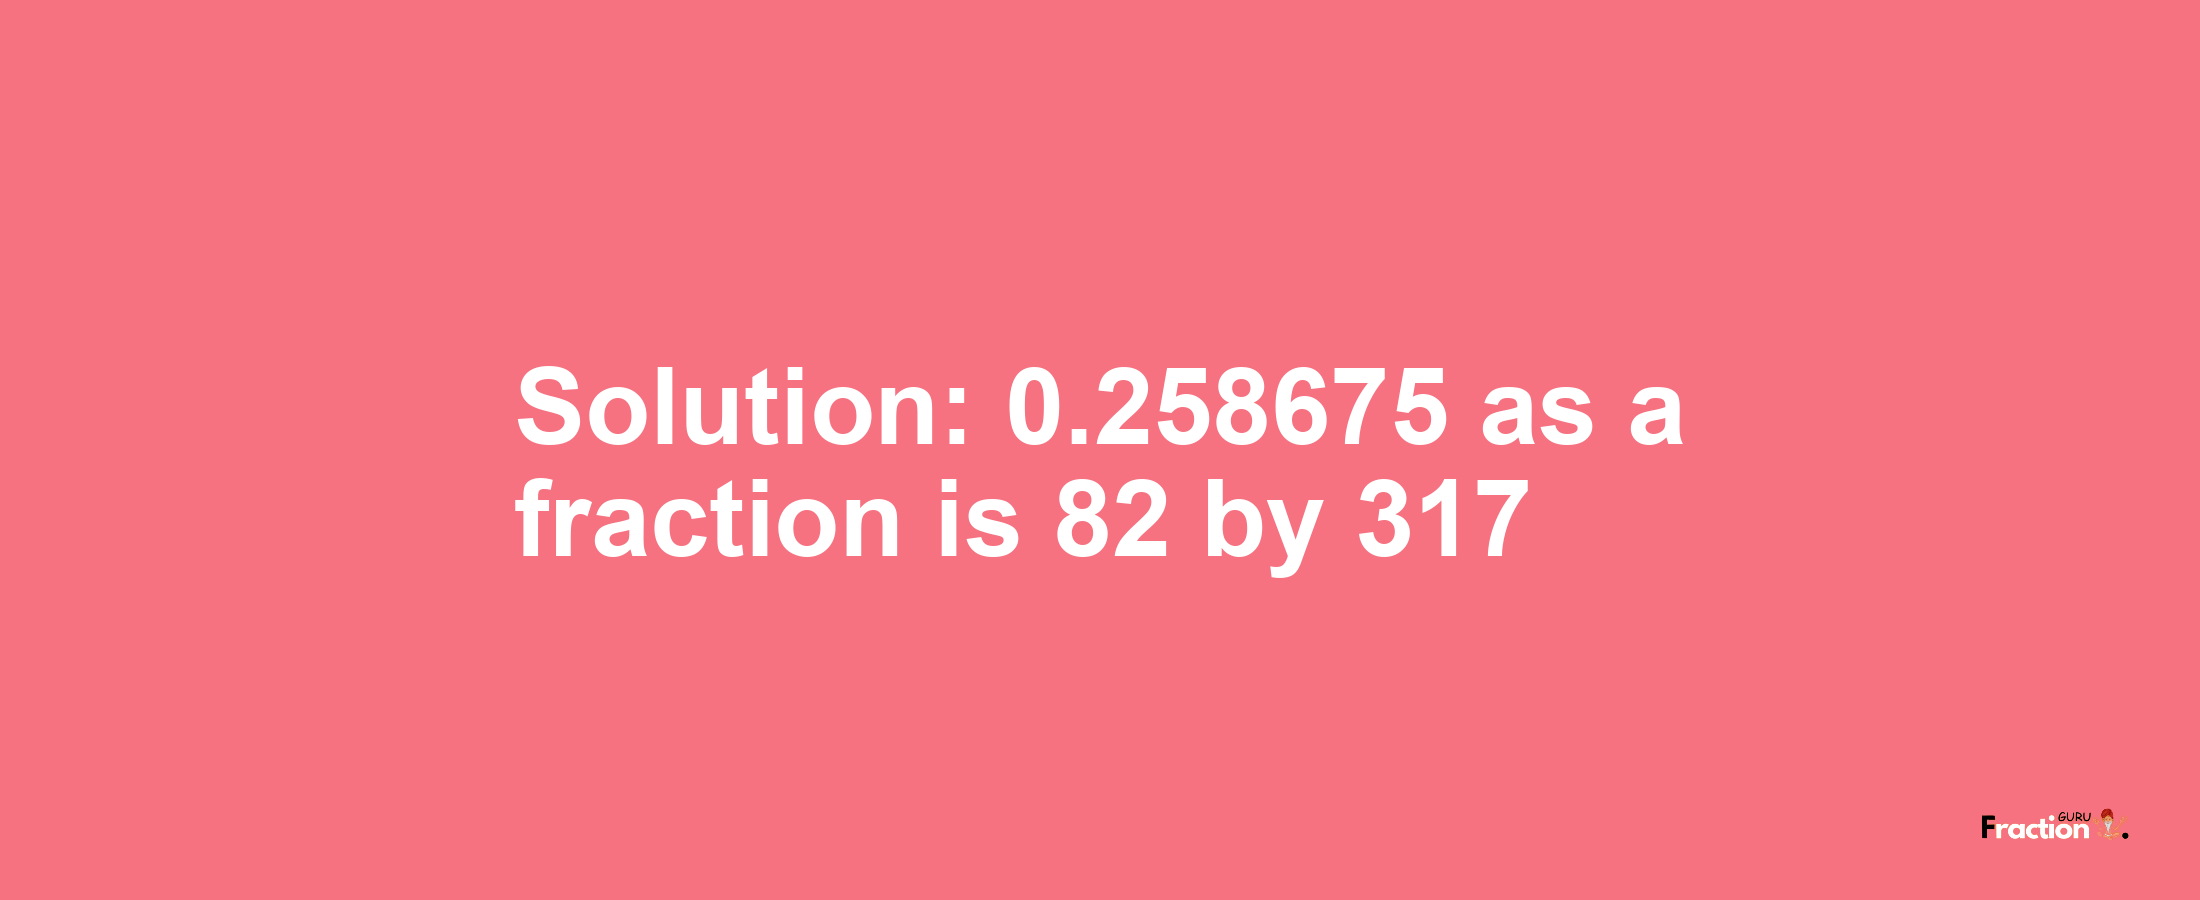 Solution:0.258675 as a fraction is 82/317